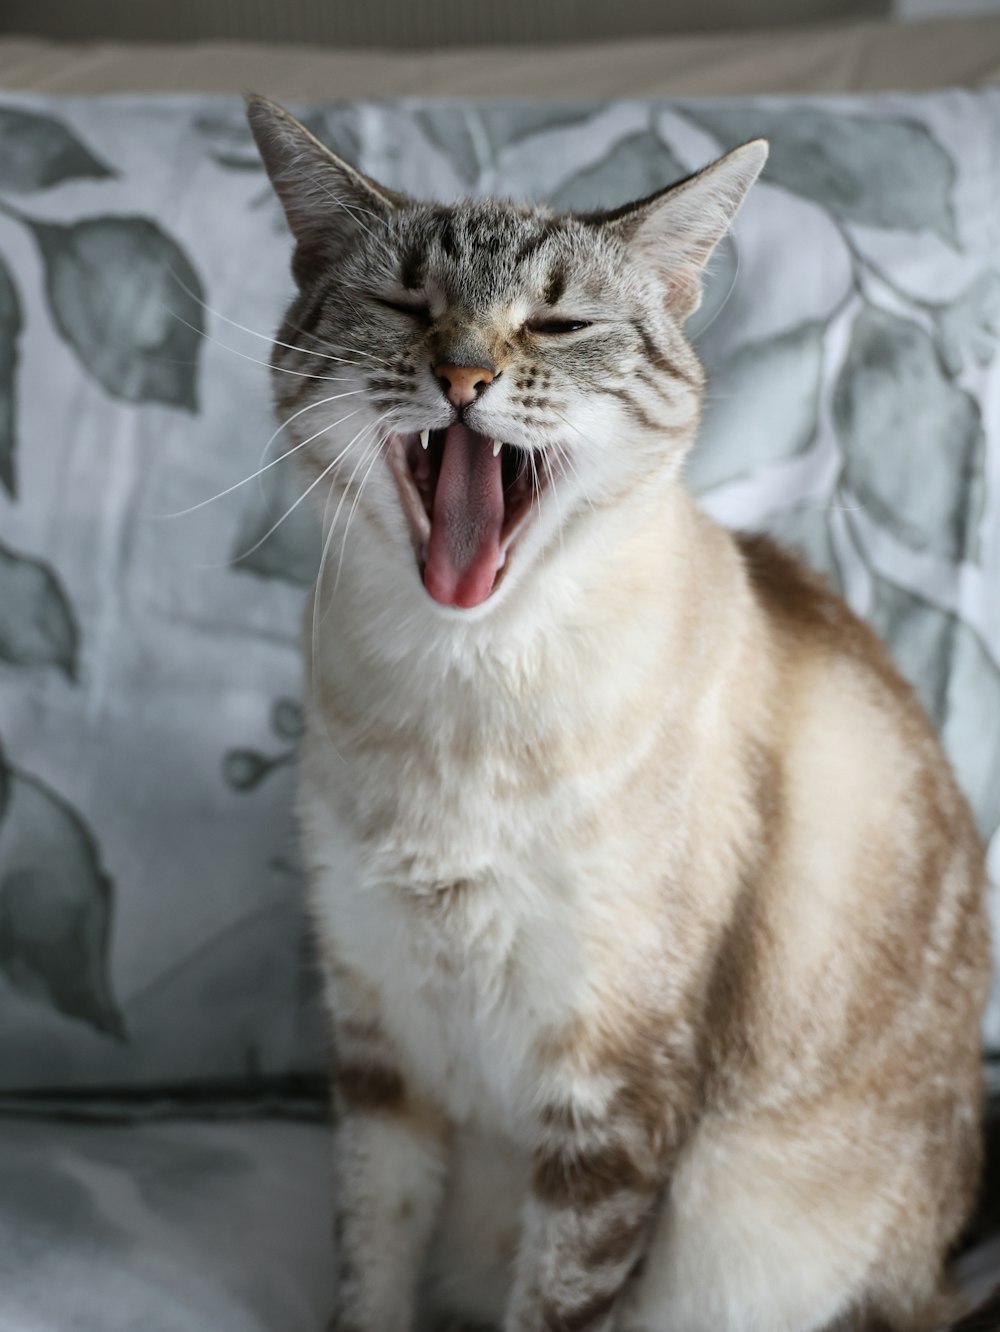 a cat yawns while sitting on a couch